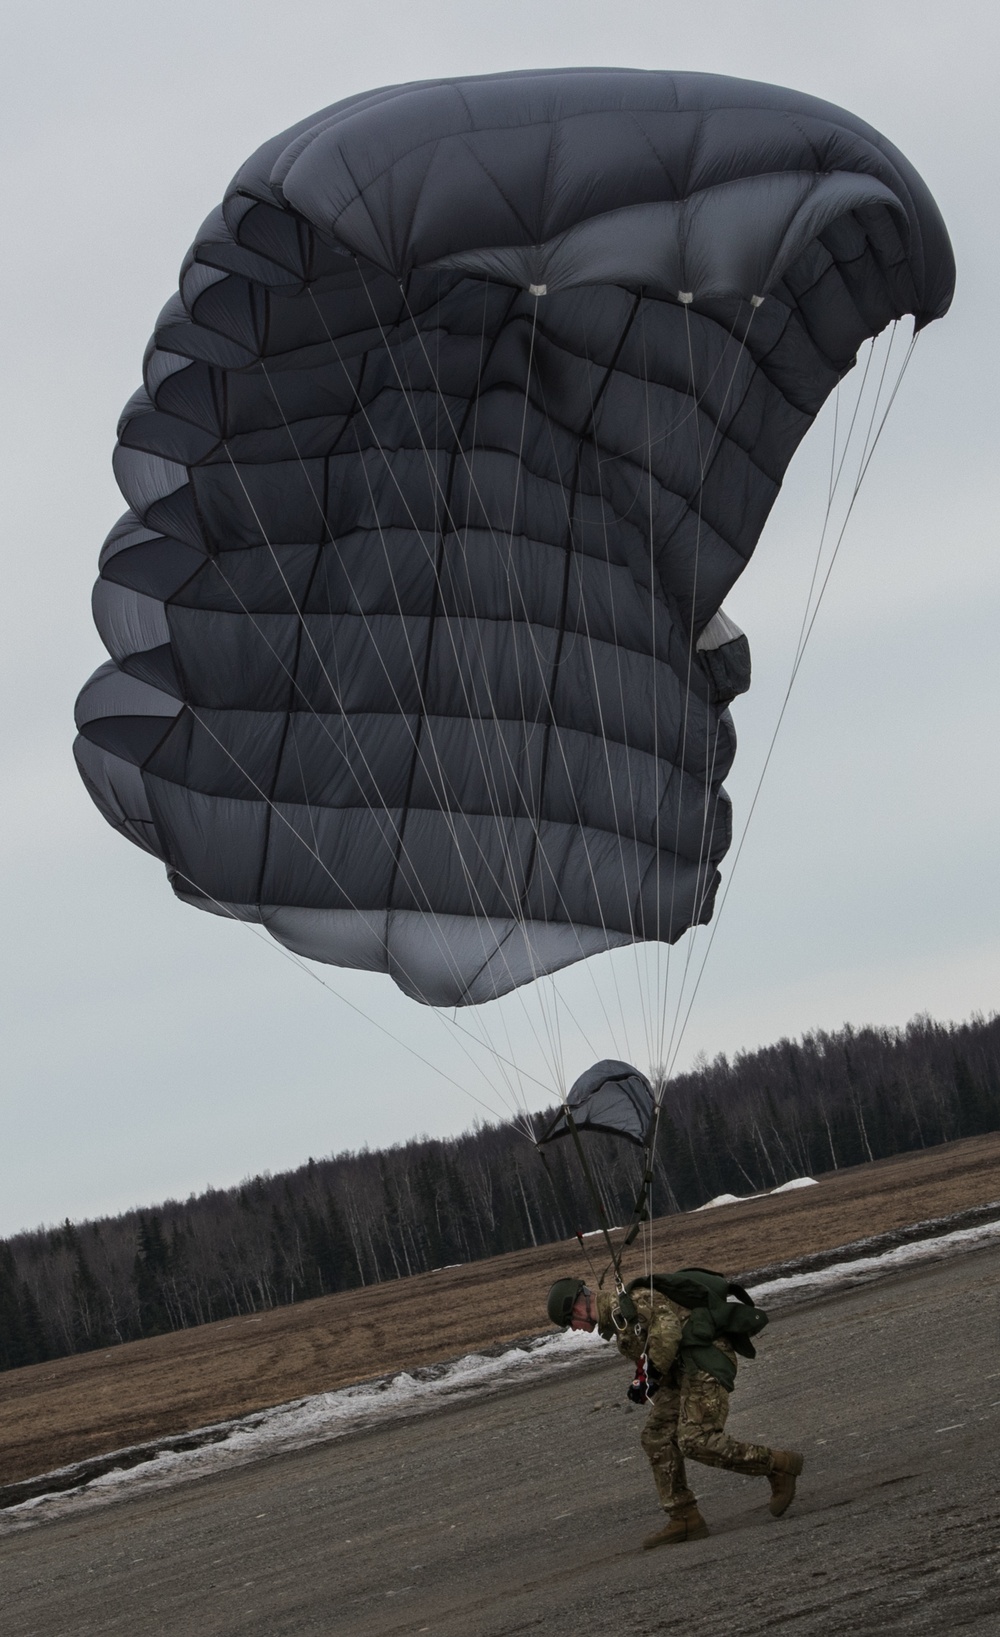 USARAK Soldiers parachute from Black Hawks